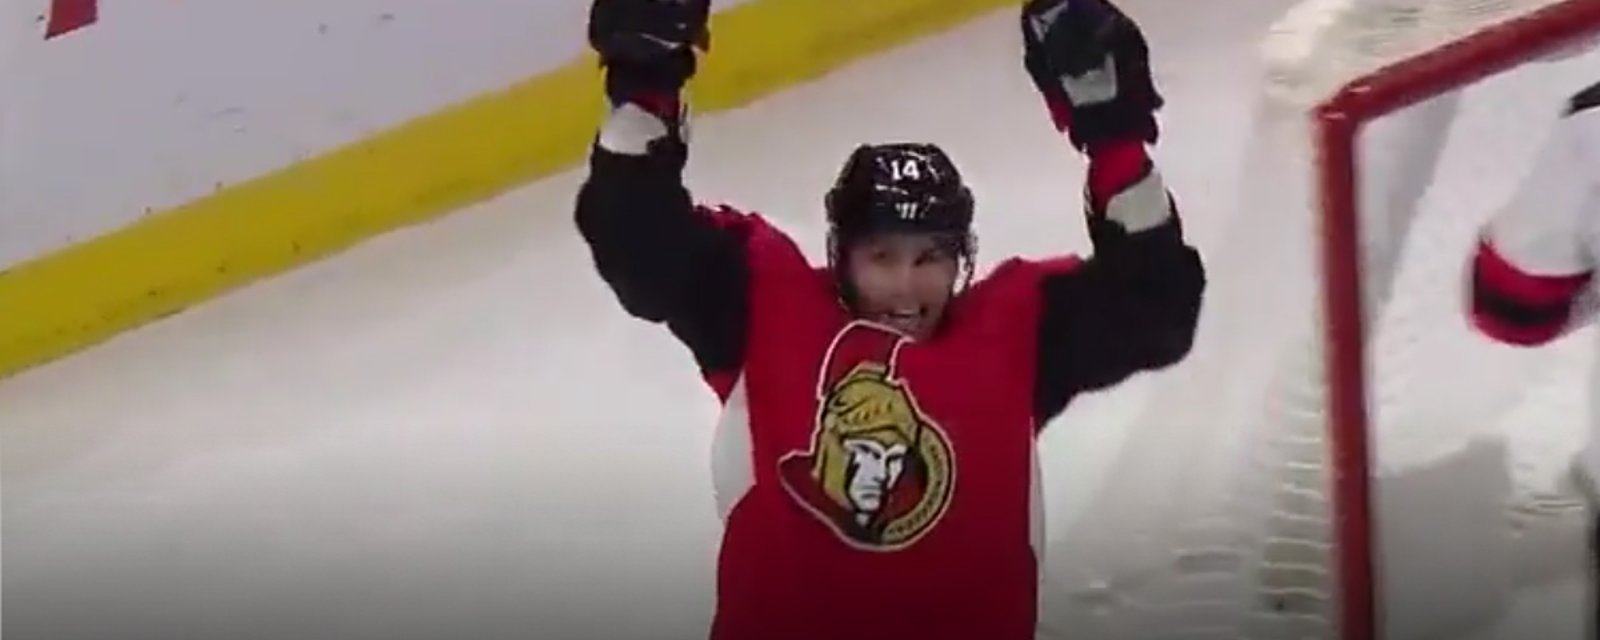 Must see: Karlsson sets up Burrows' 200th goal with gorgeous assist